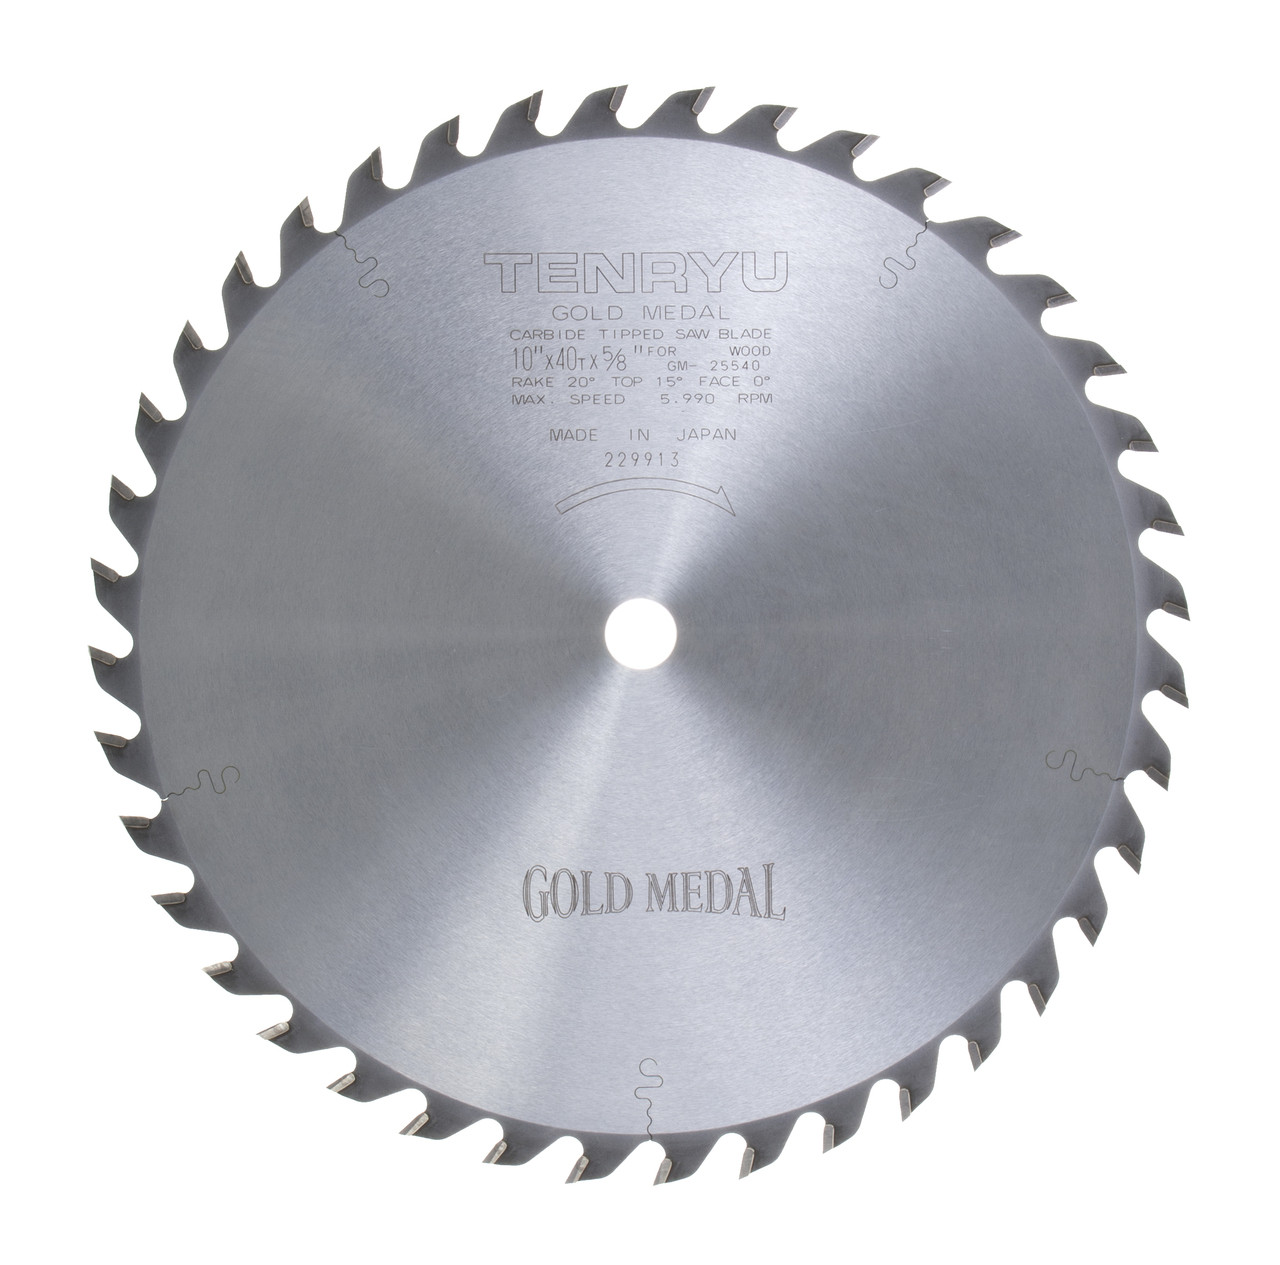 Tenryu Rs-25540 10" X 40t ATB Carbide Blade for sale online 